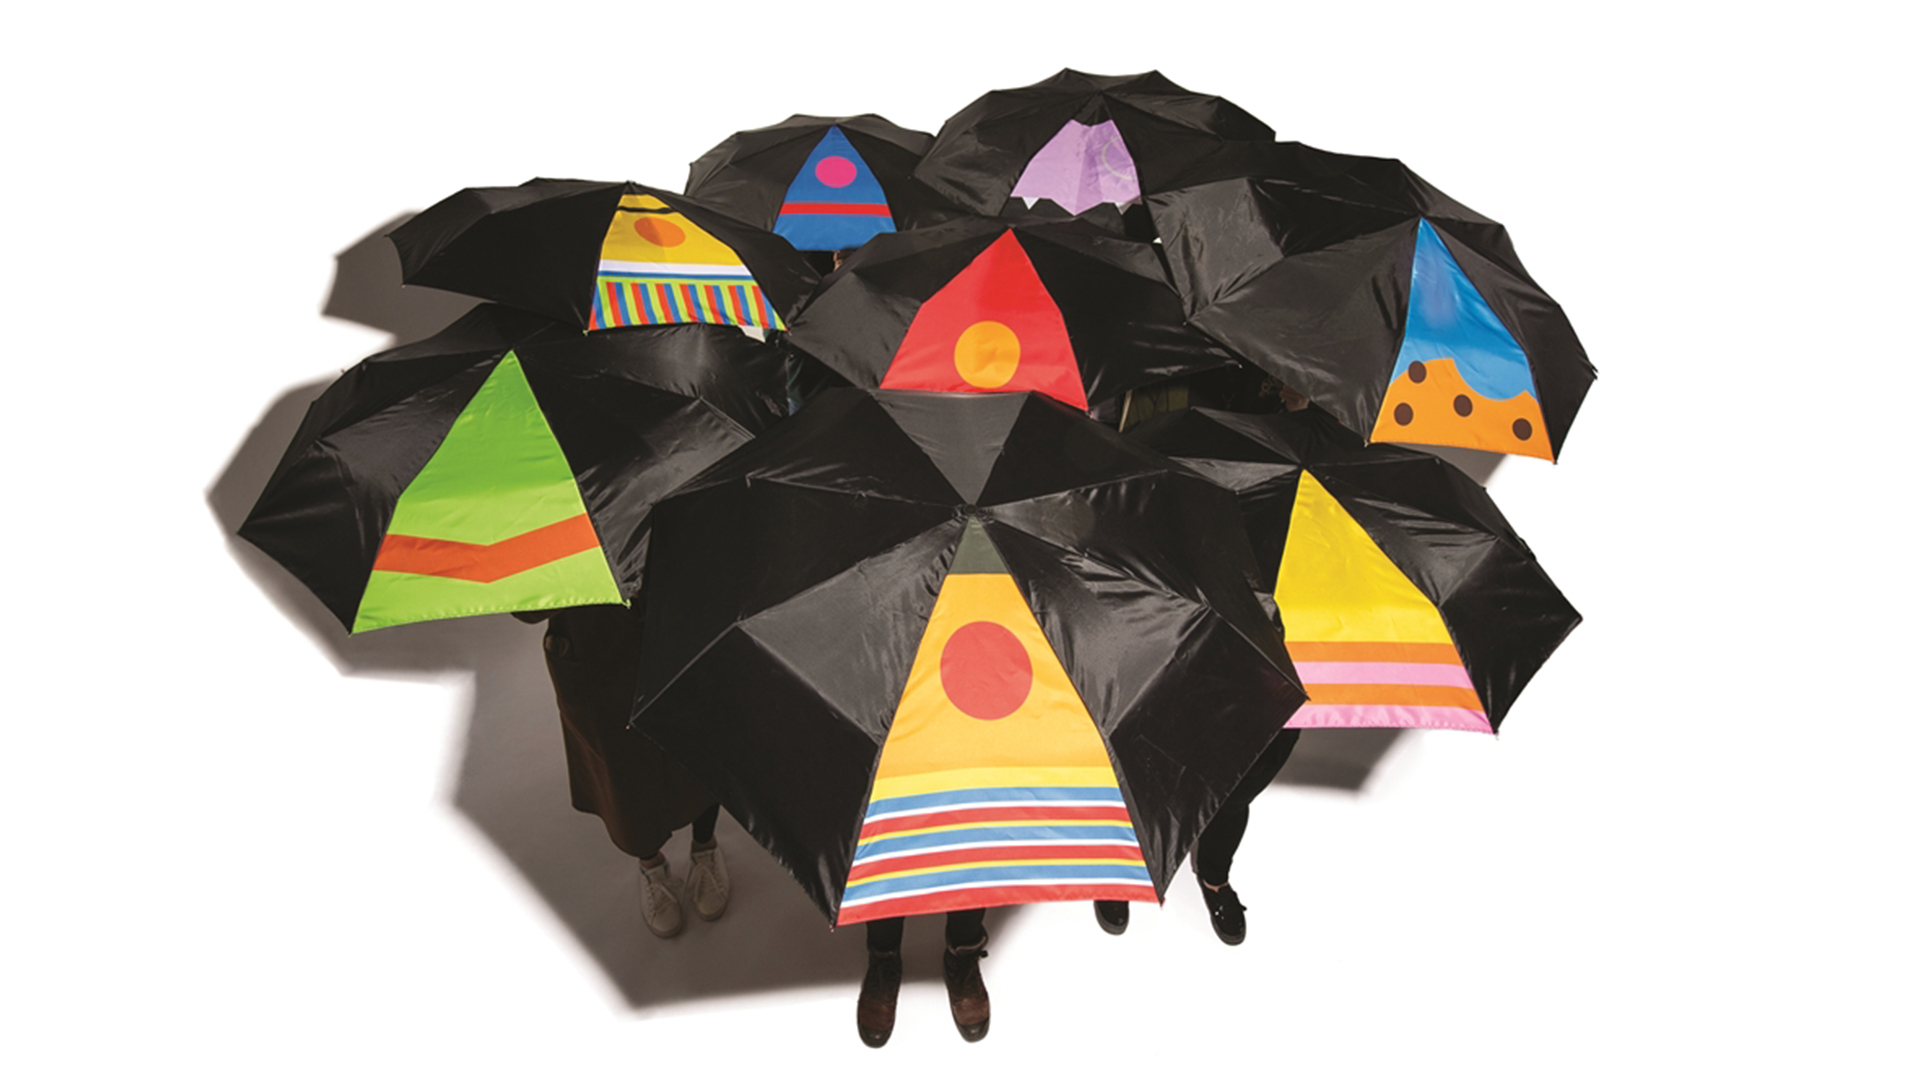 8 umbrellas open with people obscured underneath, each mostly black with one section of bright color